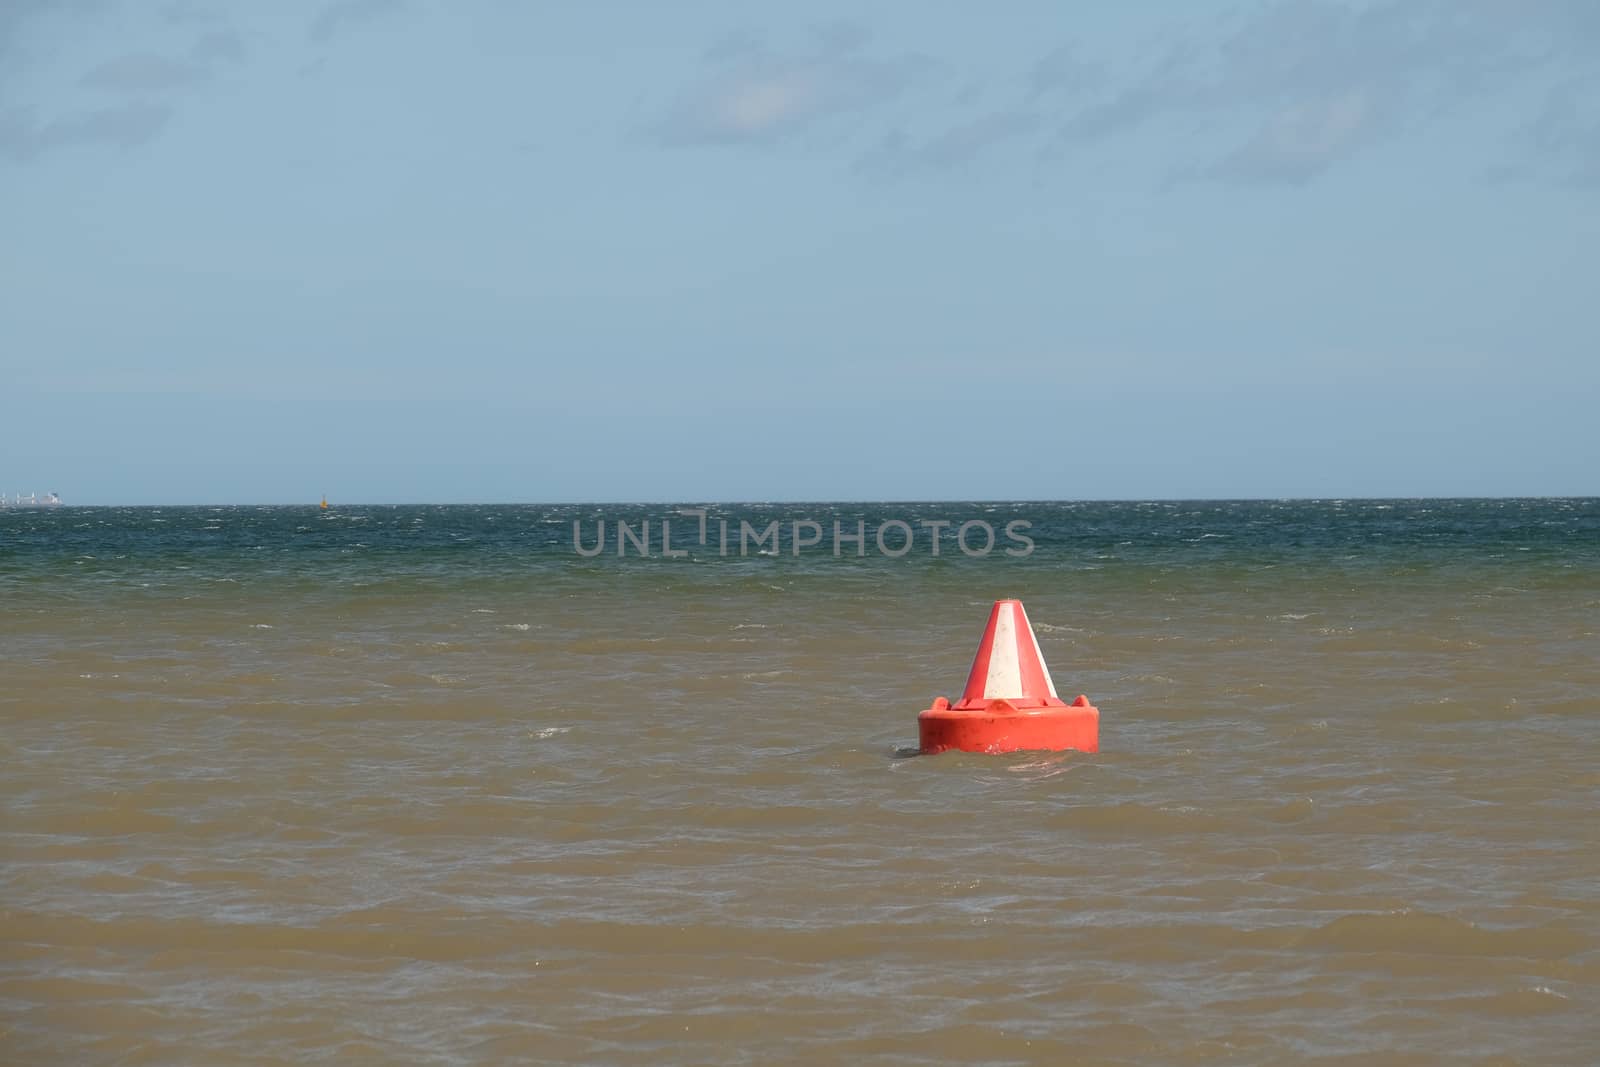 A red and white, Bedford buoy, safe water, inlet day marker on the sea.